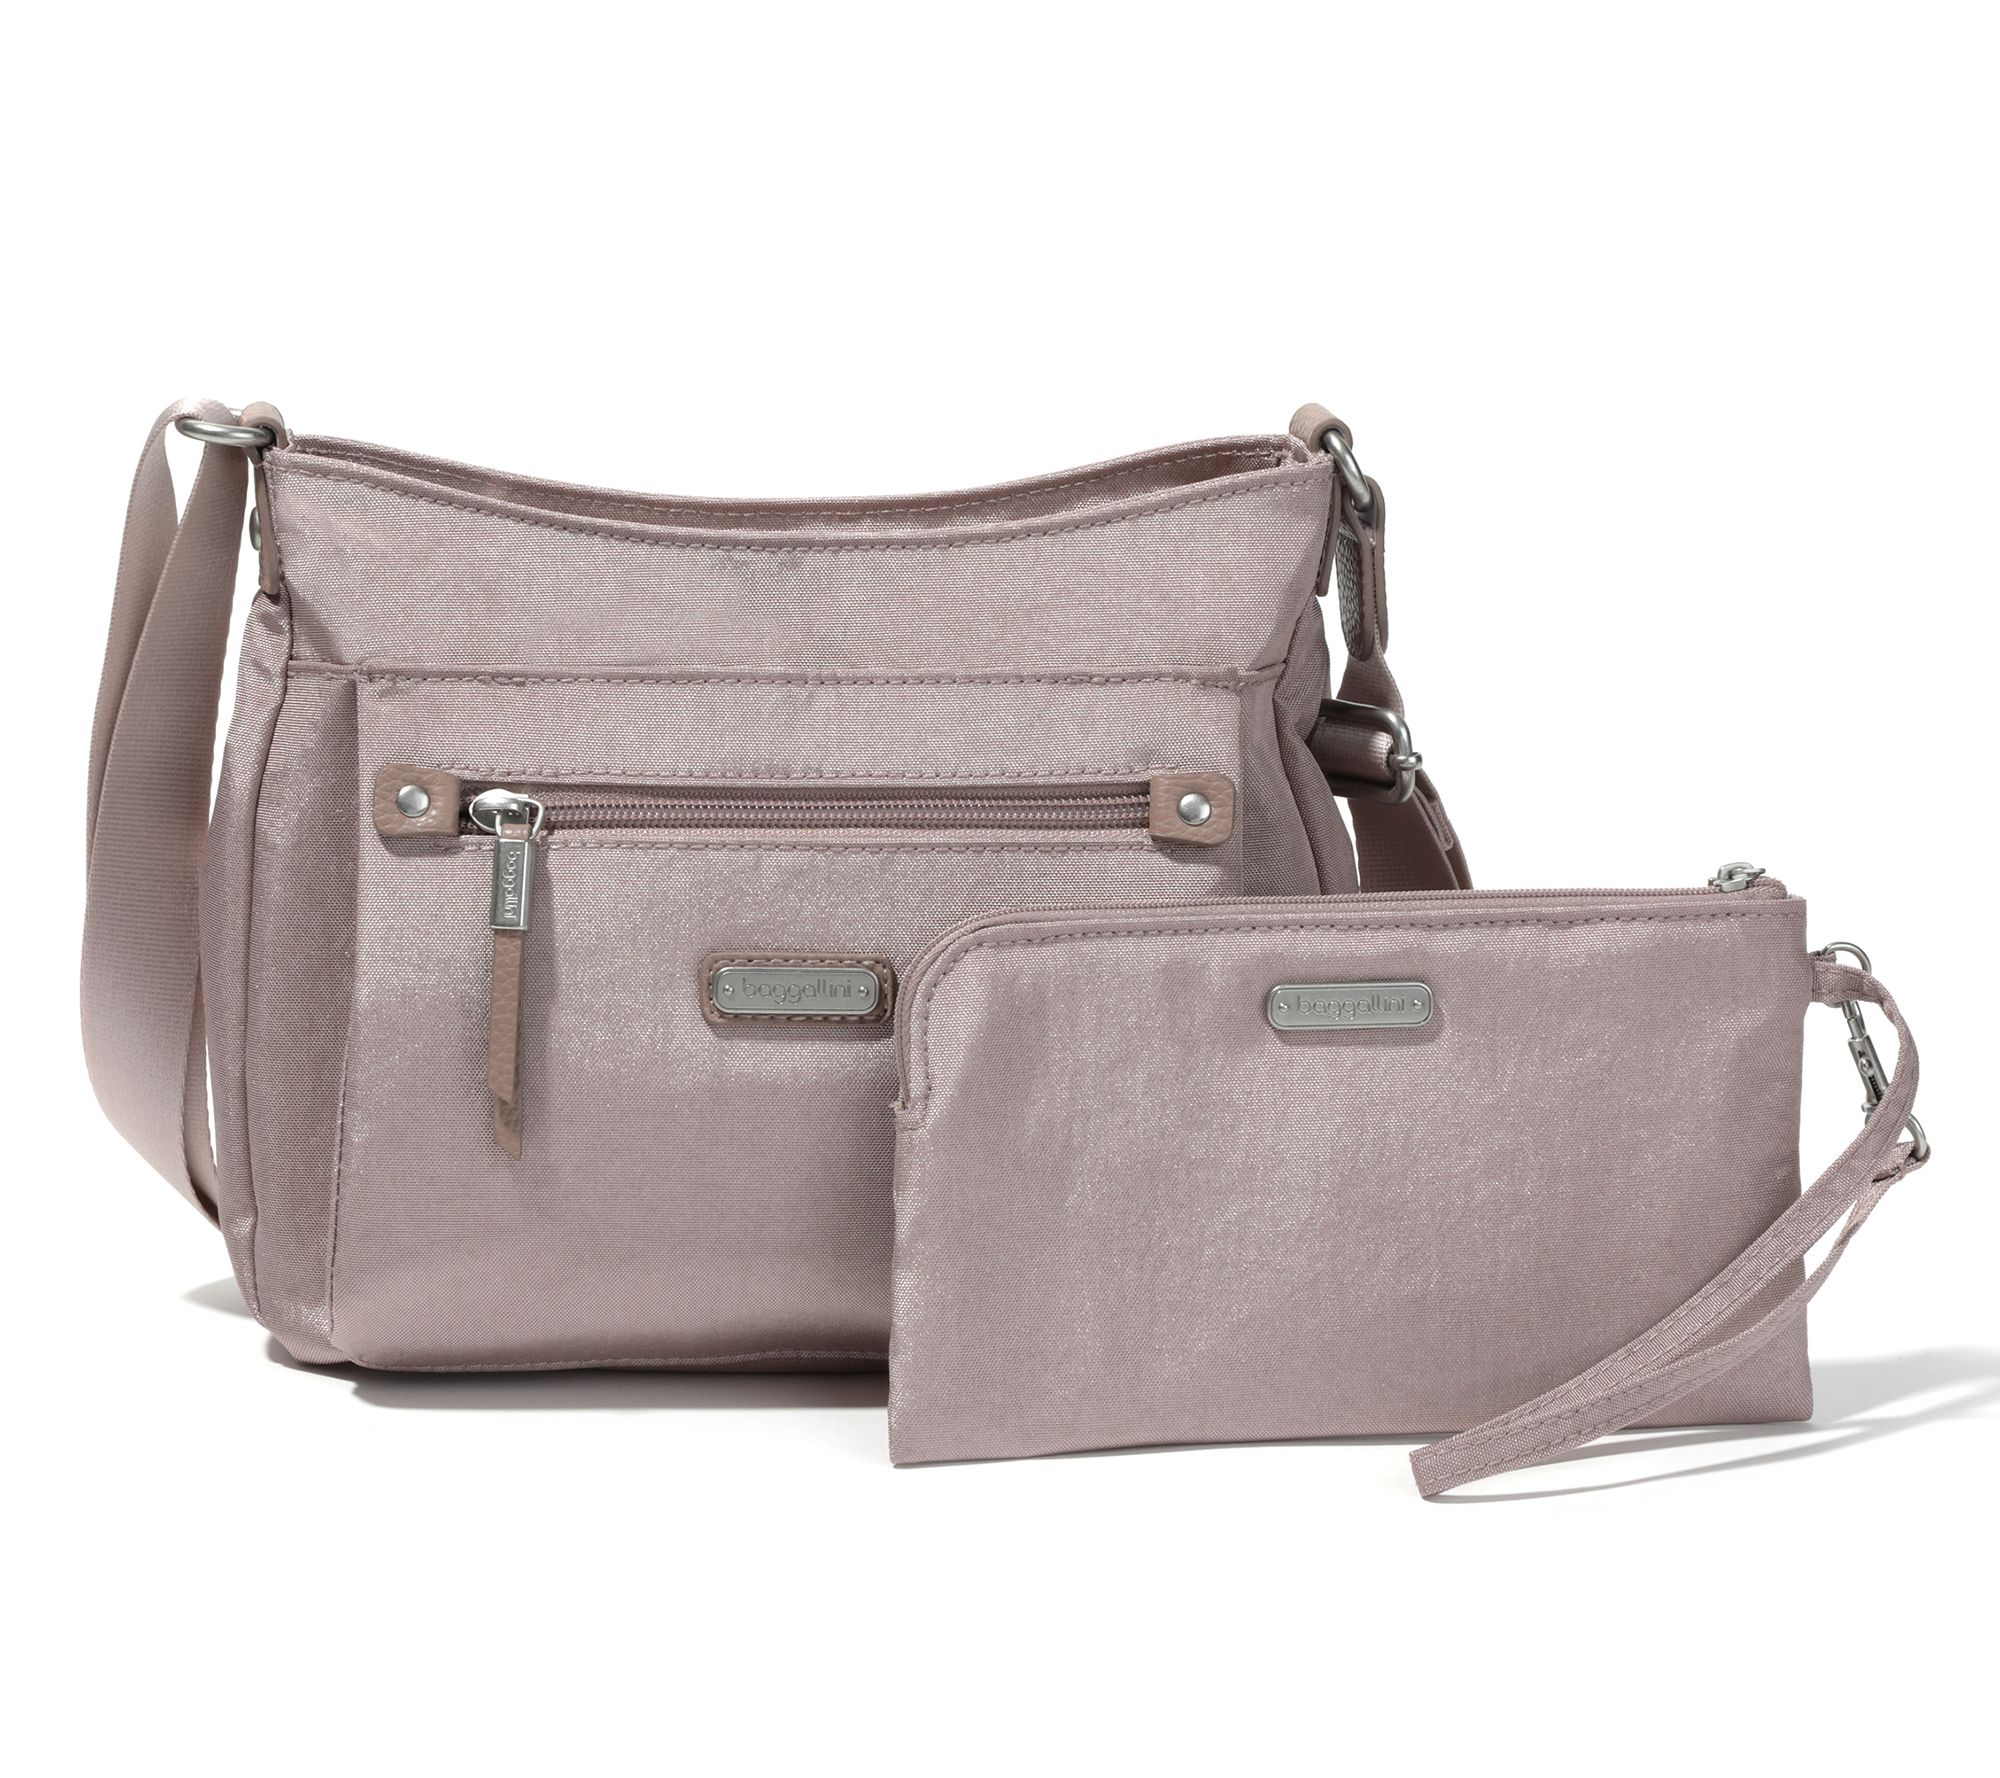 My Designer Handbag Collection & The Story Behind Each Bag - Loverly Grey